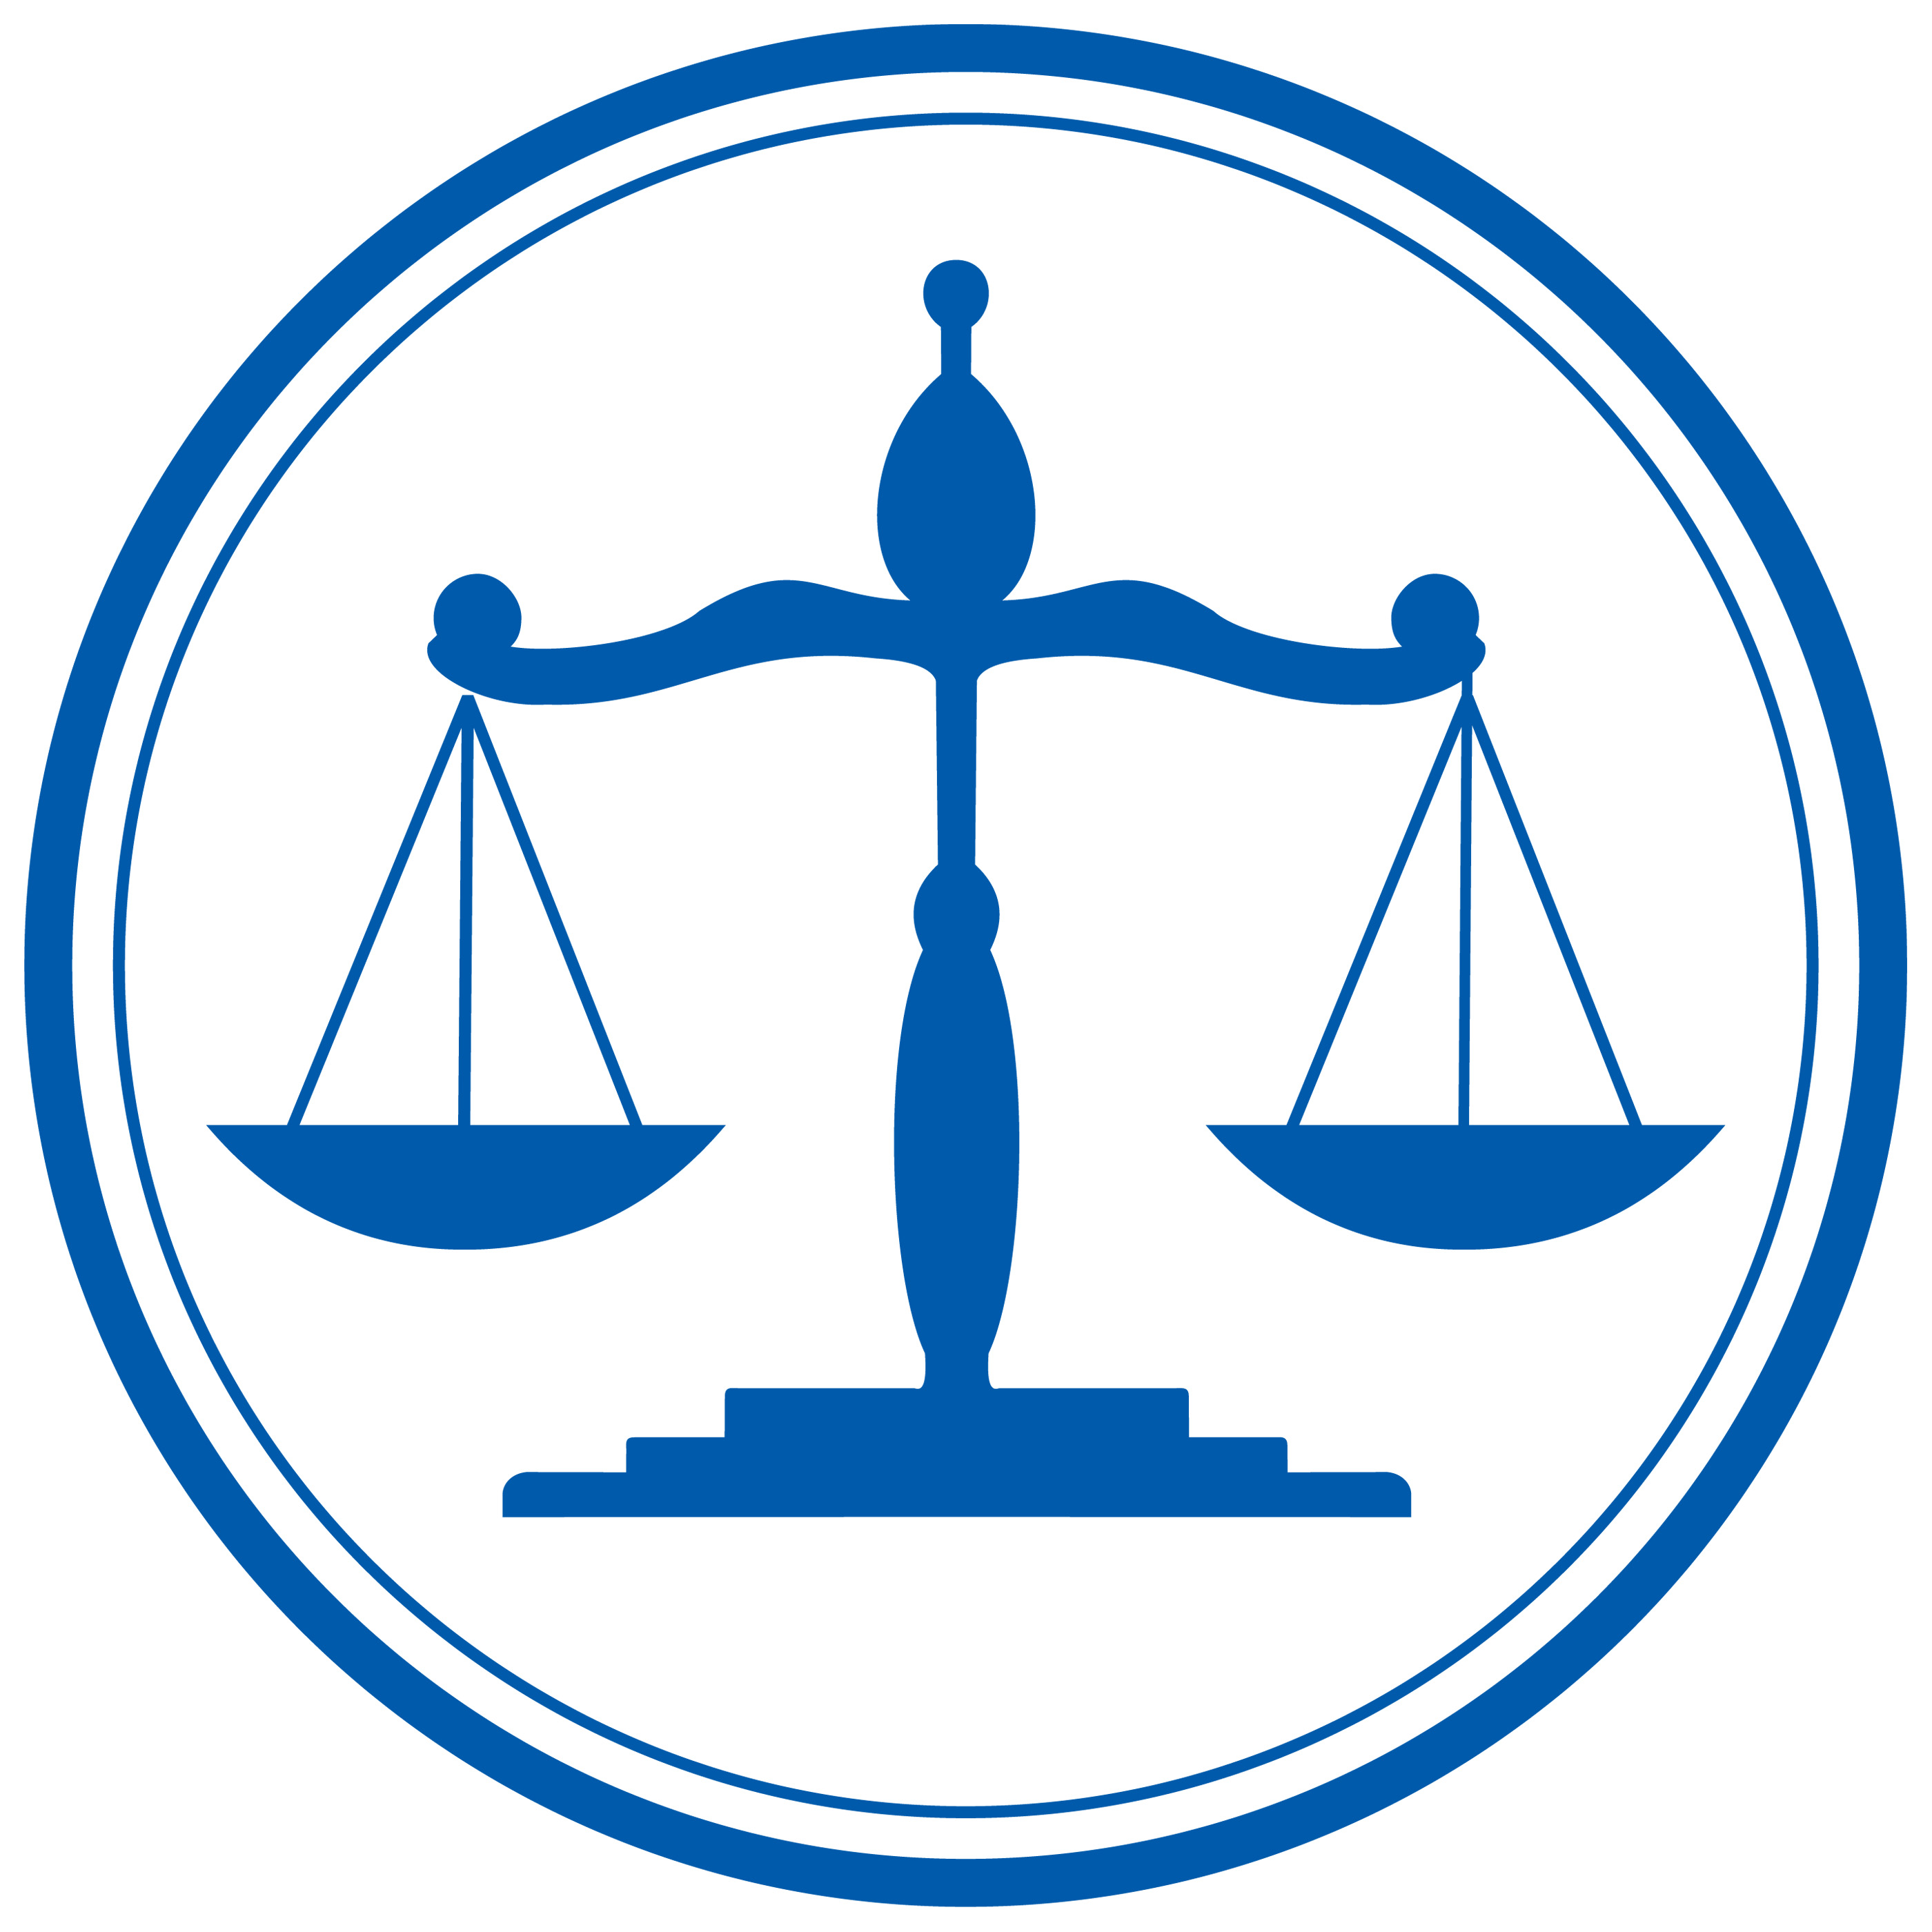 Legal scale of law clipart.